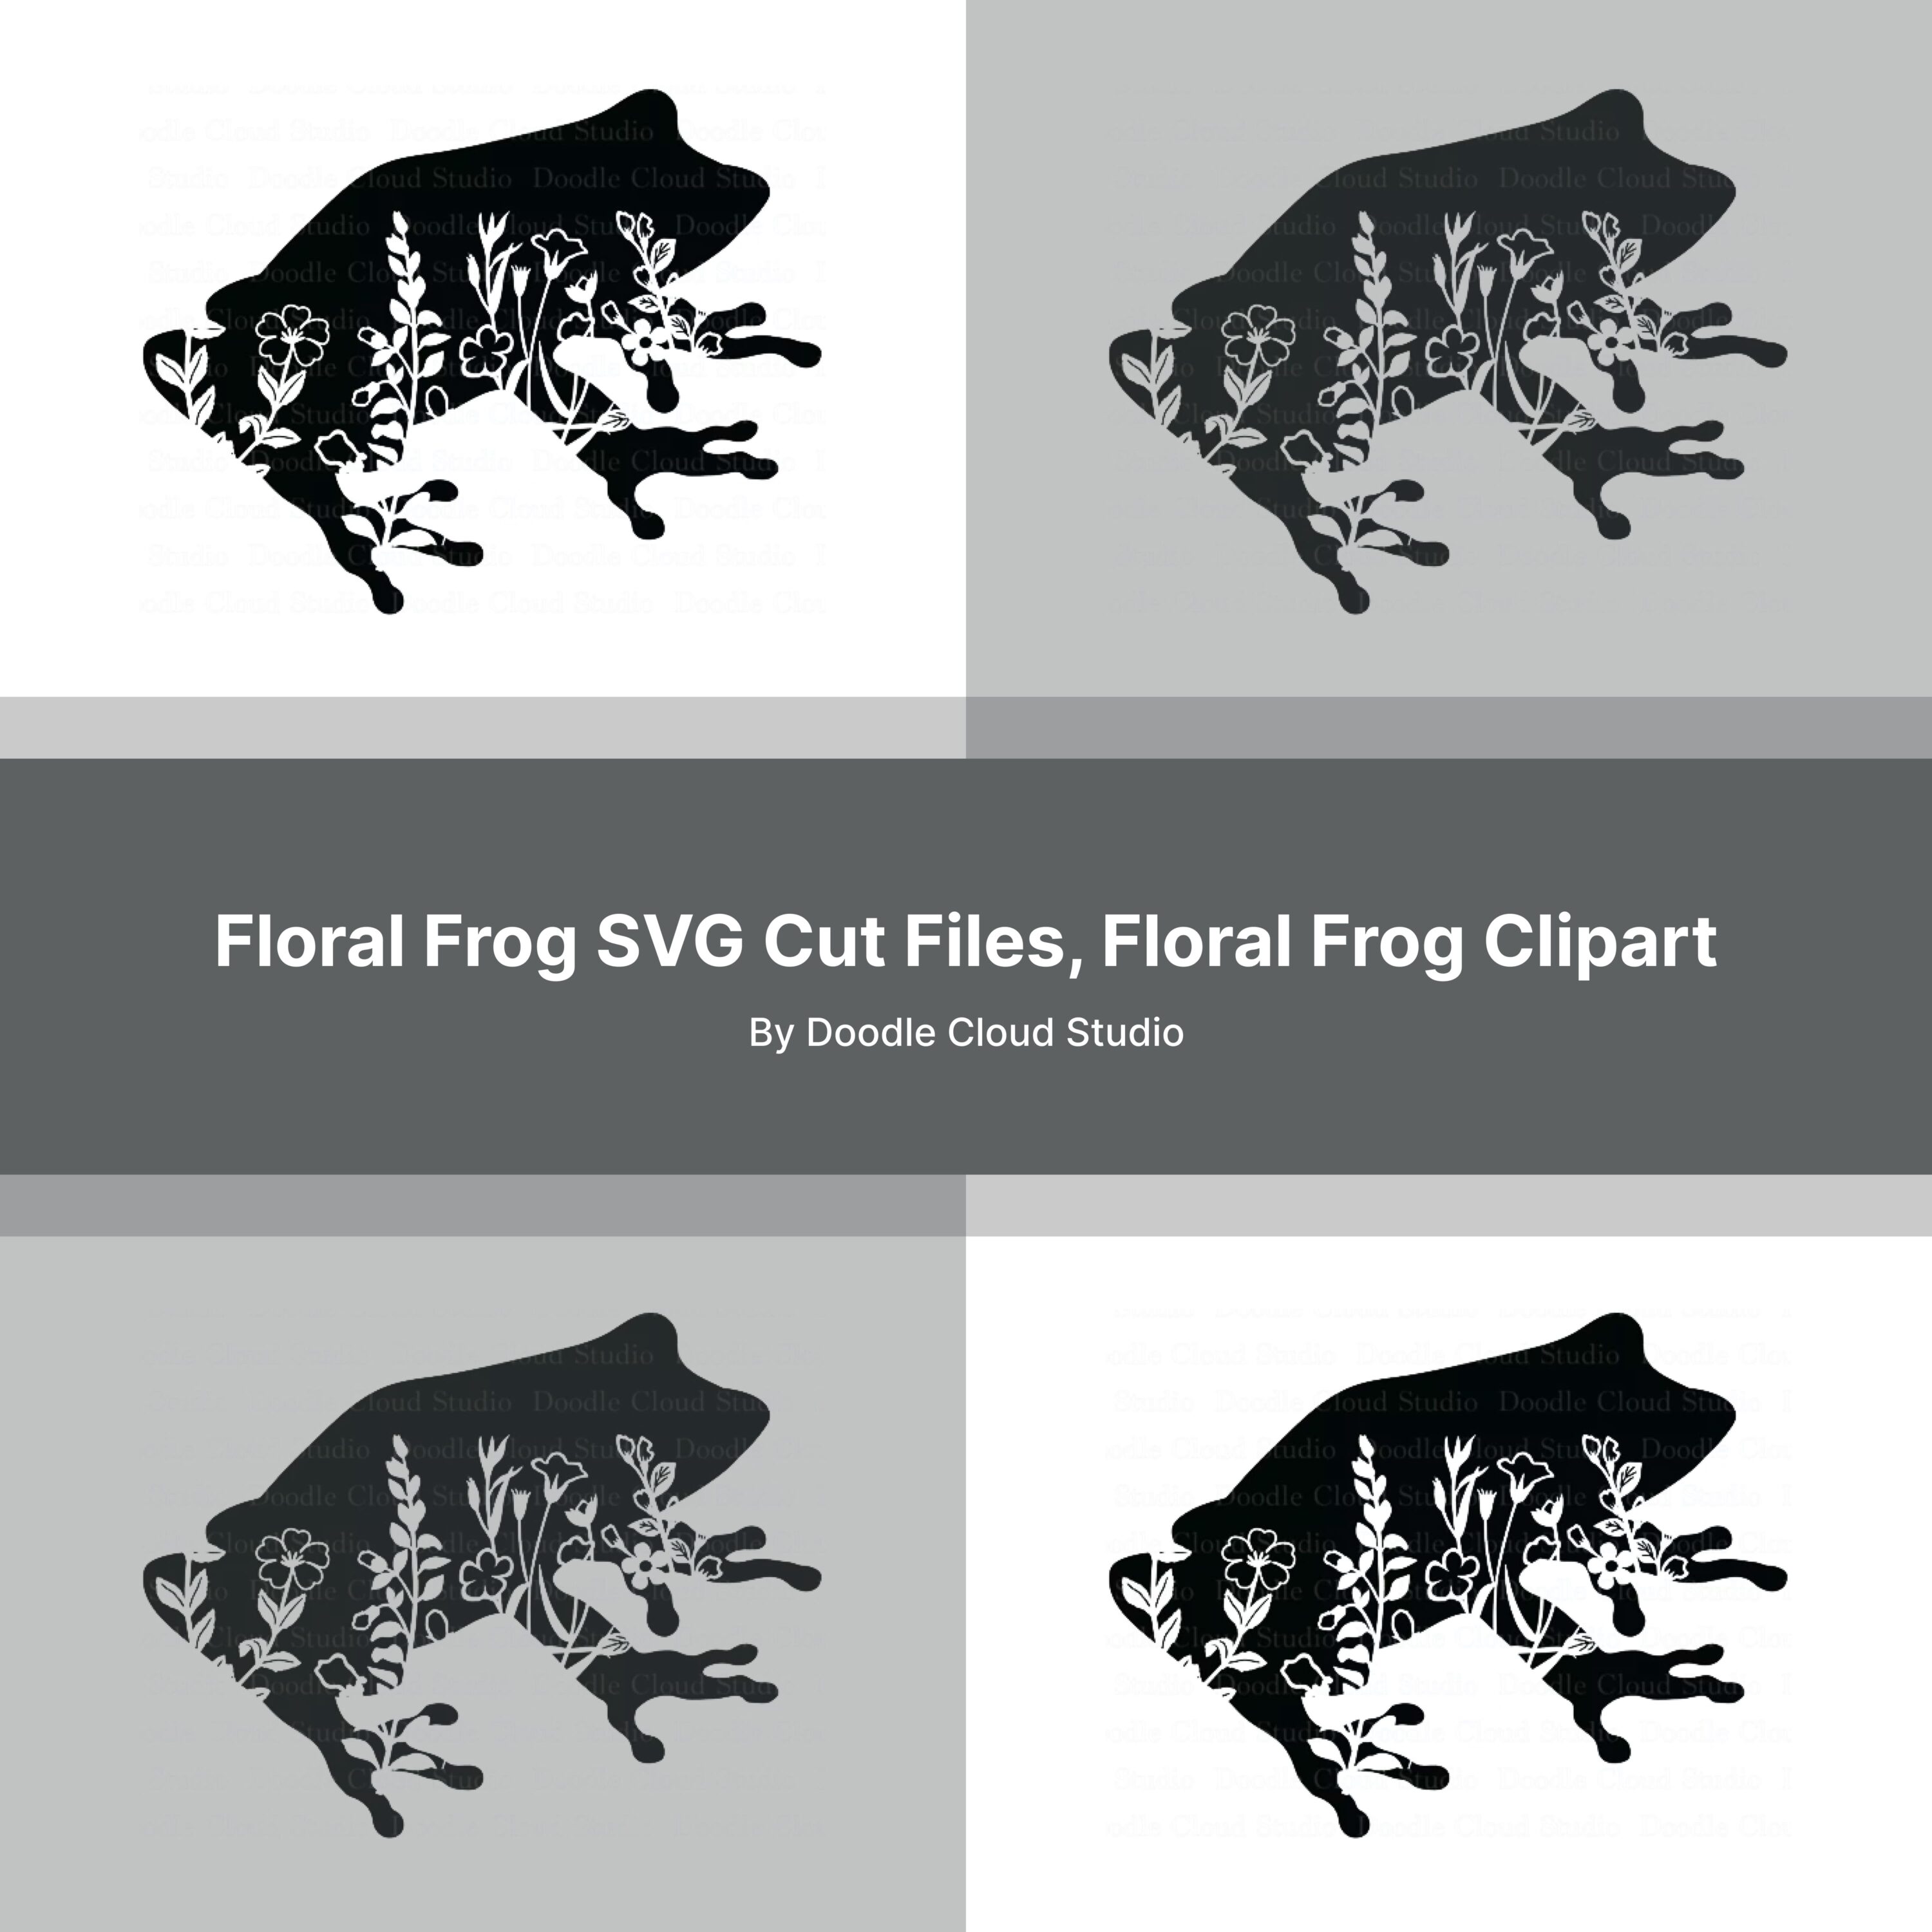 Four black and white images of a frog.